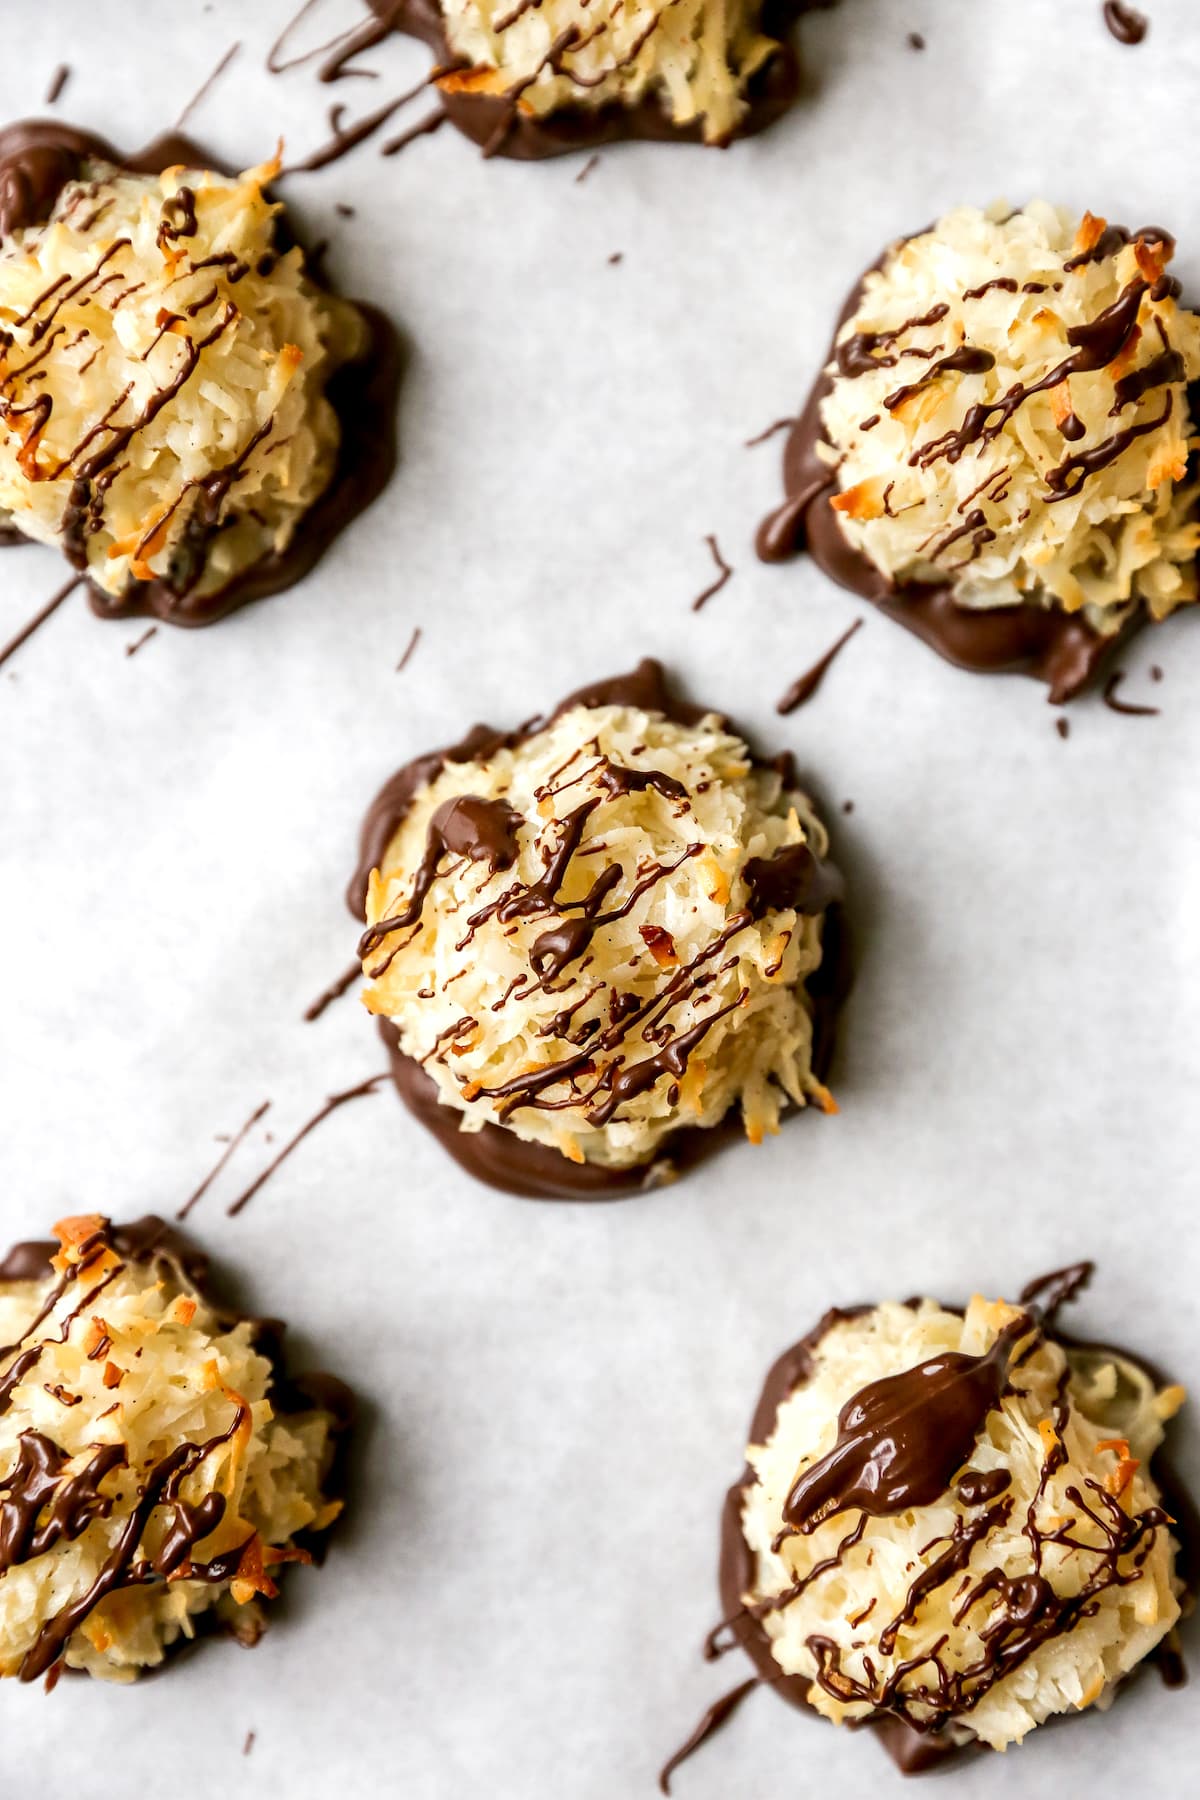 Coconut macaroons dipped in chocolate and drizzled with chocolate.